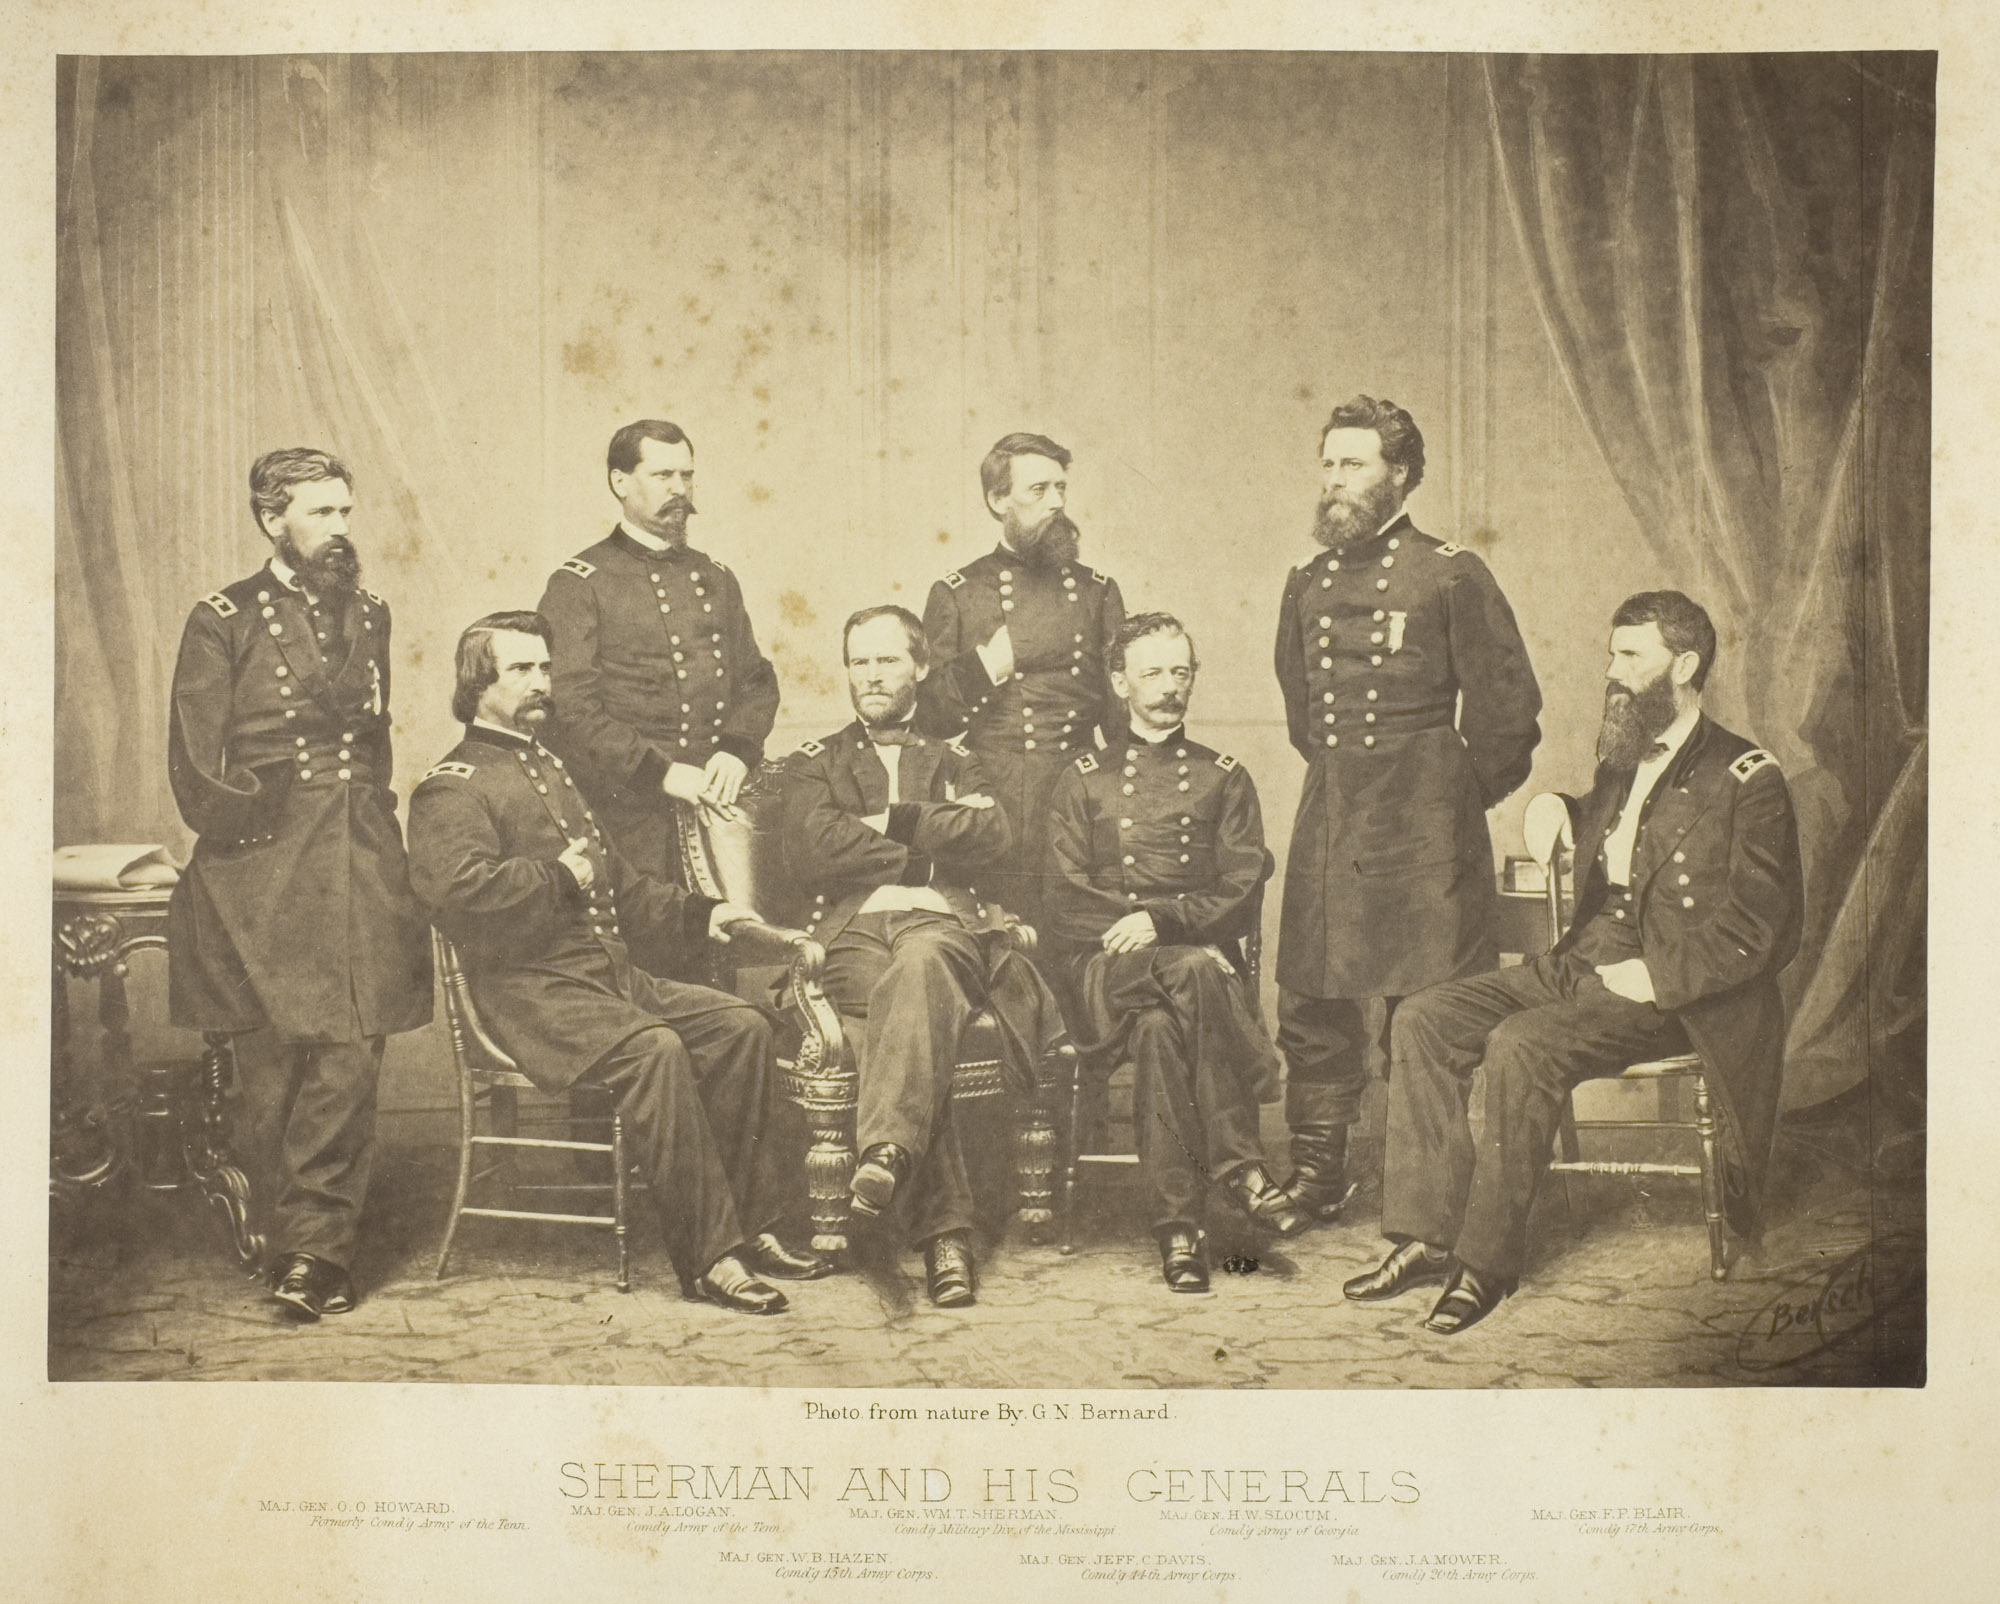 George N. Barnard, Sherman and His Generals, 1865, albumen print from collodion negative 10 1/8 x 14 1/8 inches (The Art Institute of Chicago)